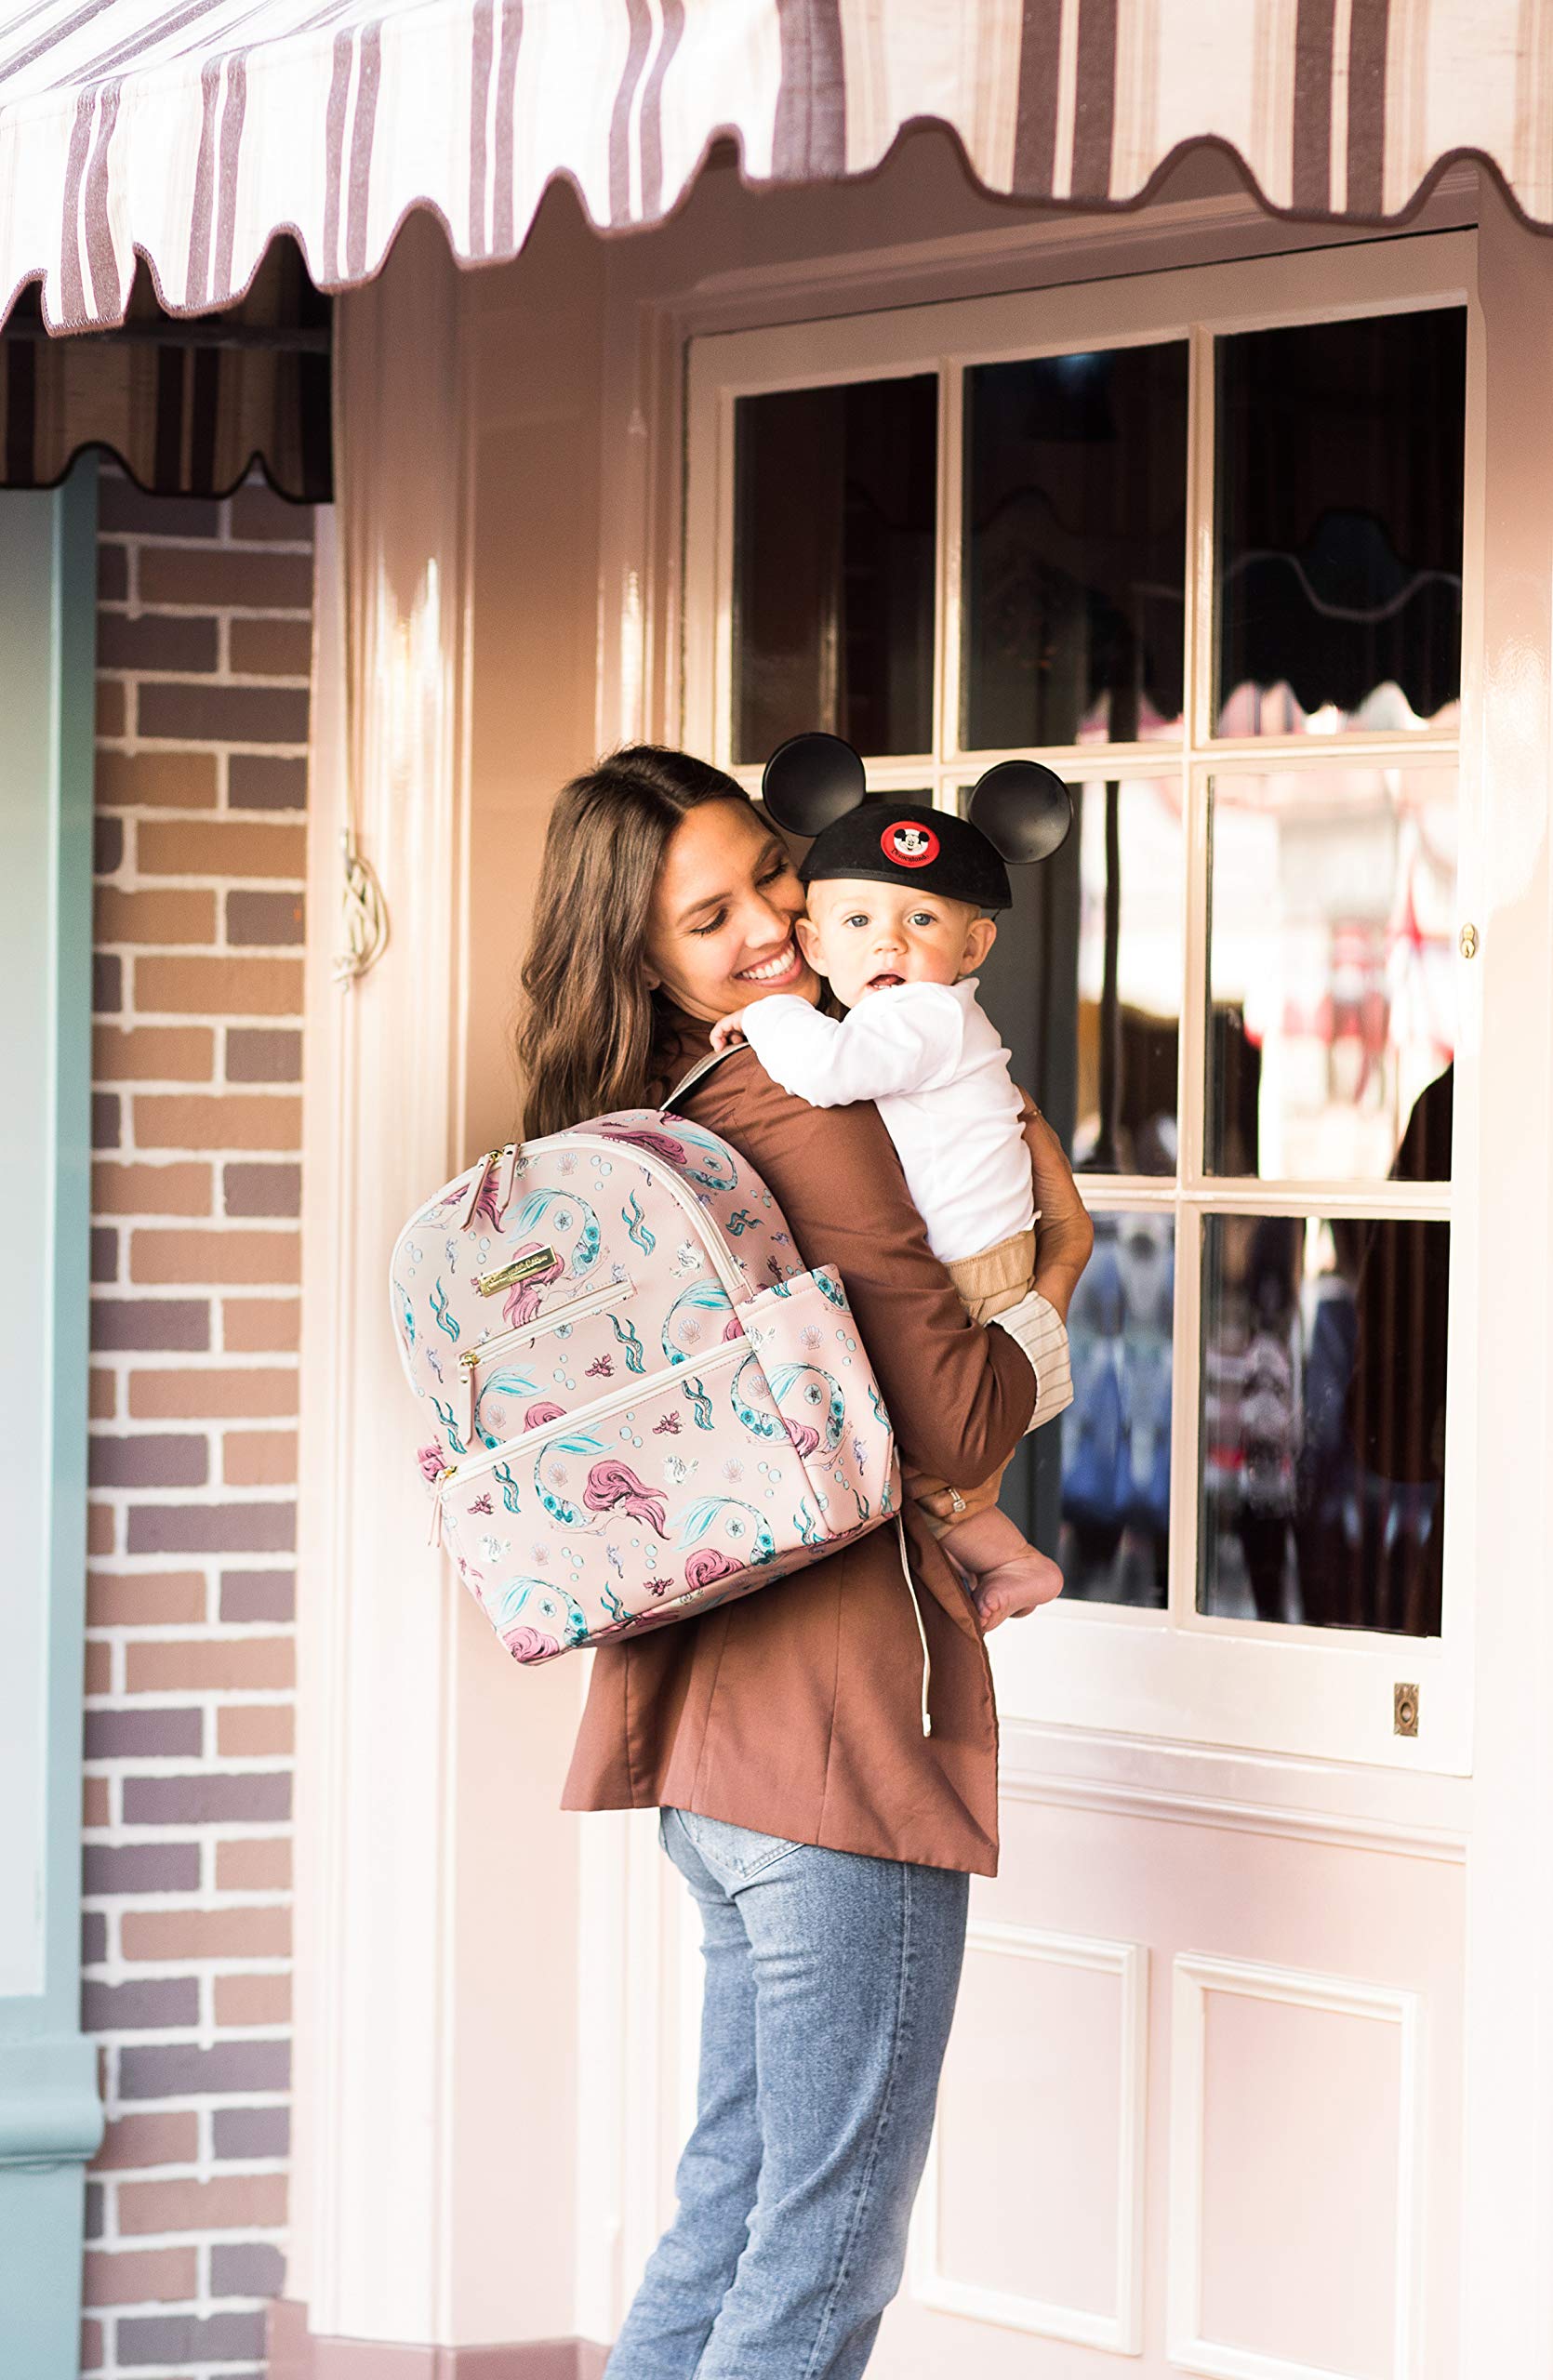 Petunia Pickle Bottom Ace Backpack | Diaper Bag | Diaper Bag Backpack for Parents | Baby Diaper Bag | Stylish and Spacious Backpack for On-the-Go Moms and Dads | Little Mermaid